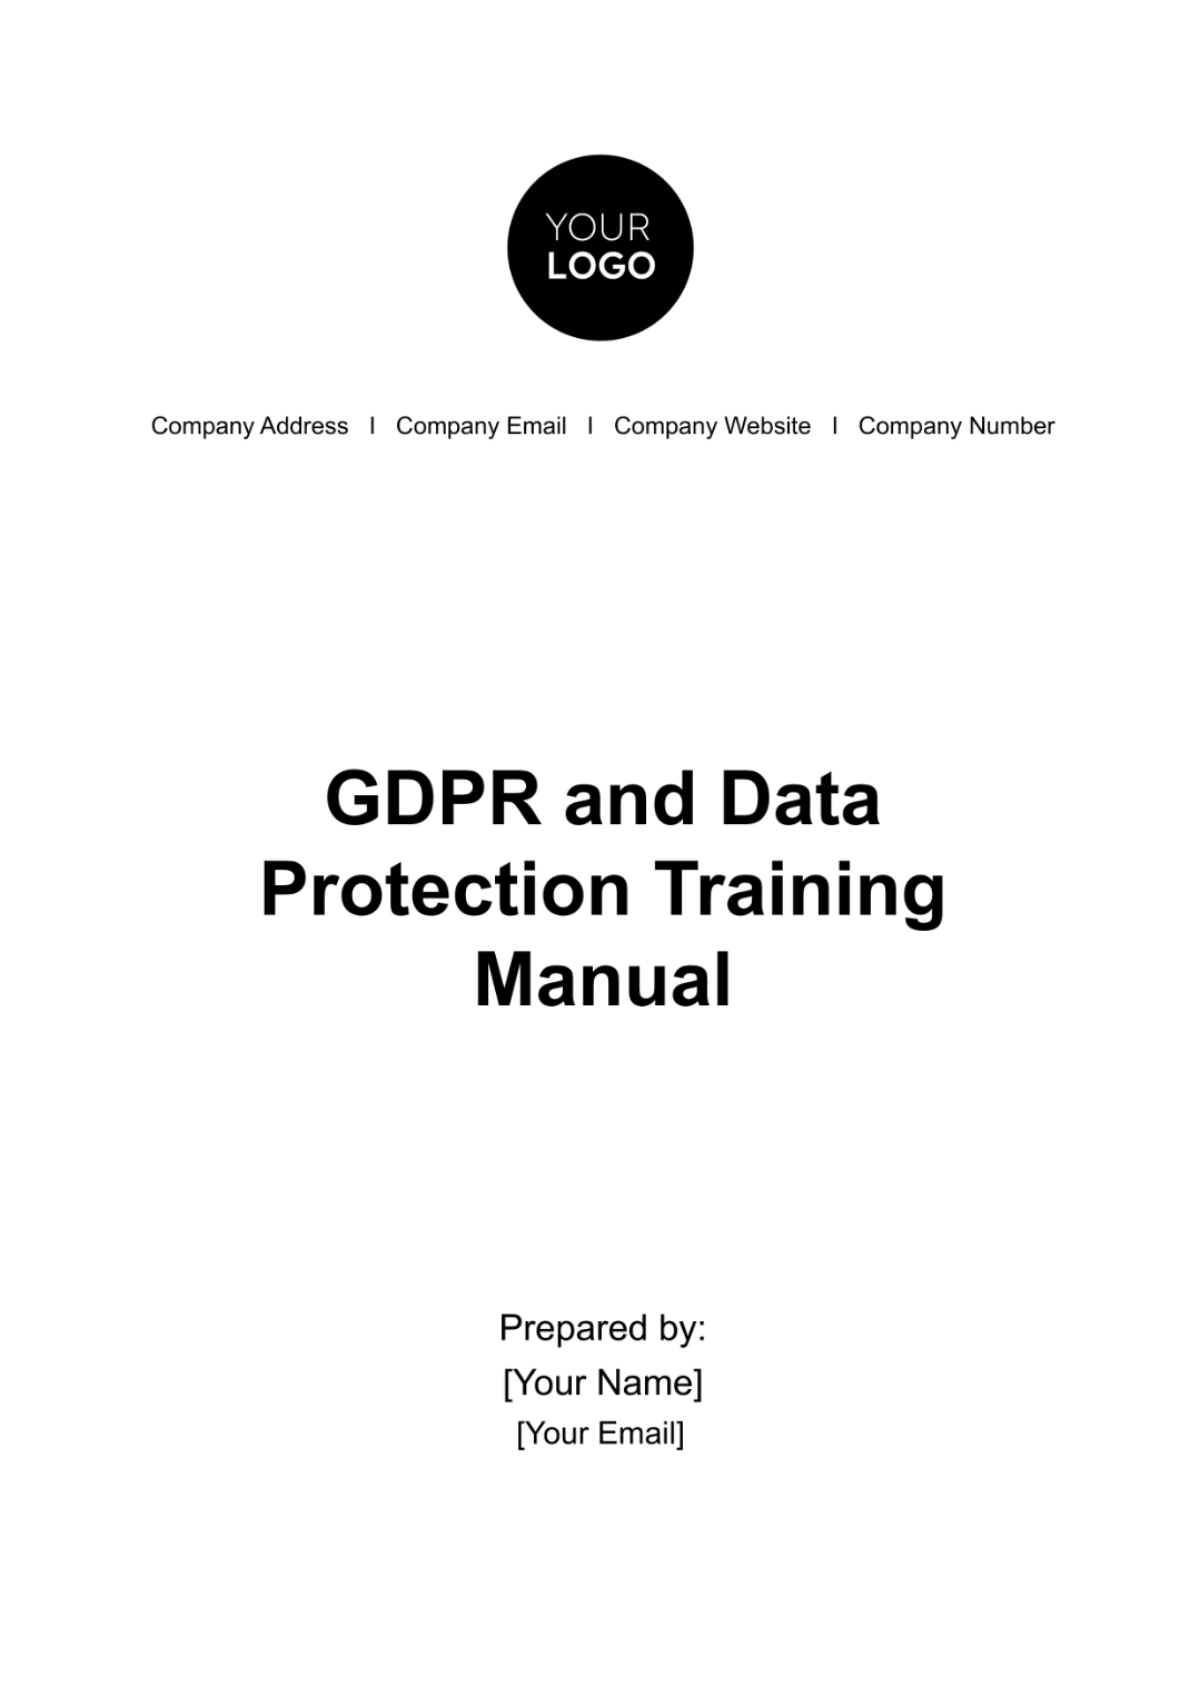 Free GDPR and Data Protection Training Manual HR Template